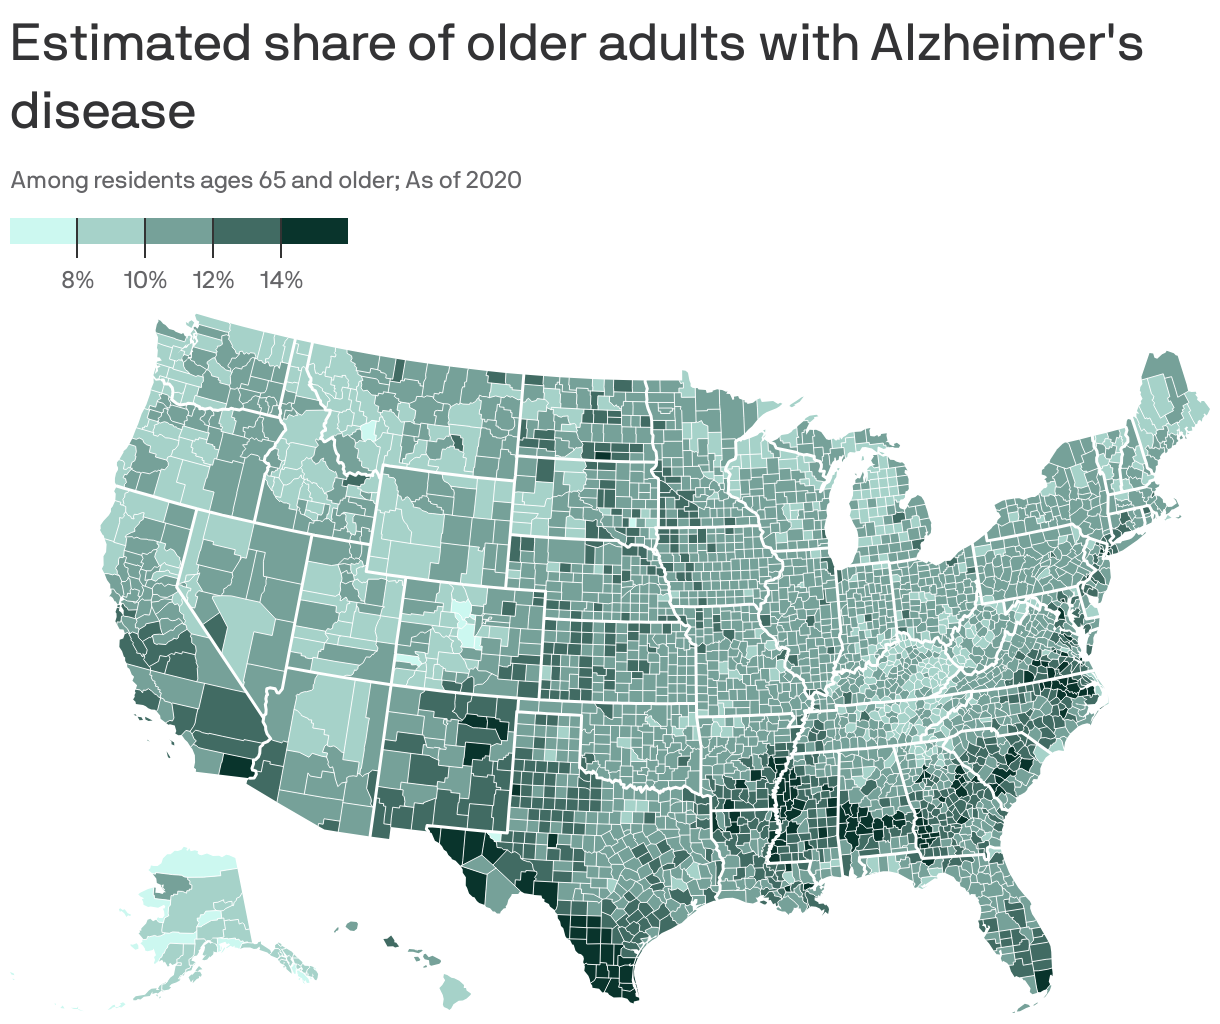 Estimated share of older adults with Alzheimer's disease dementia